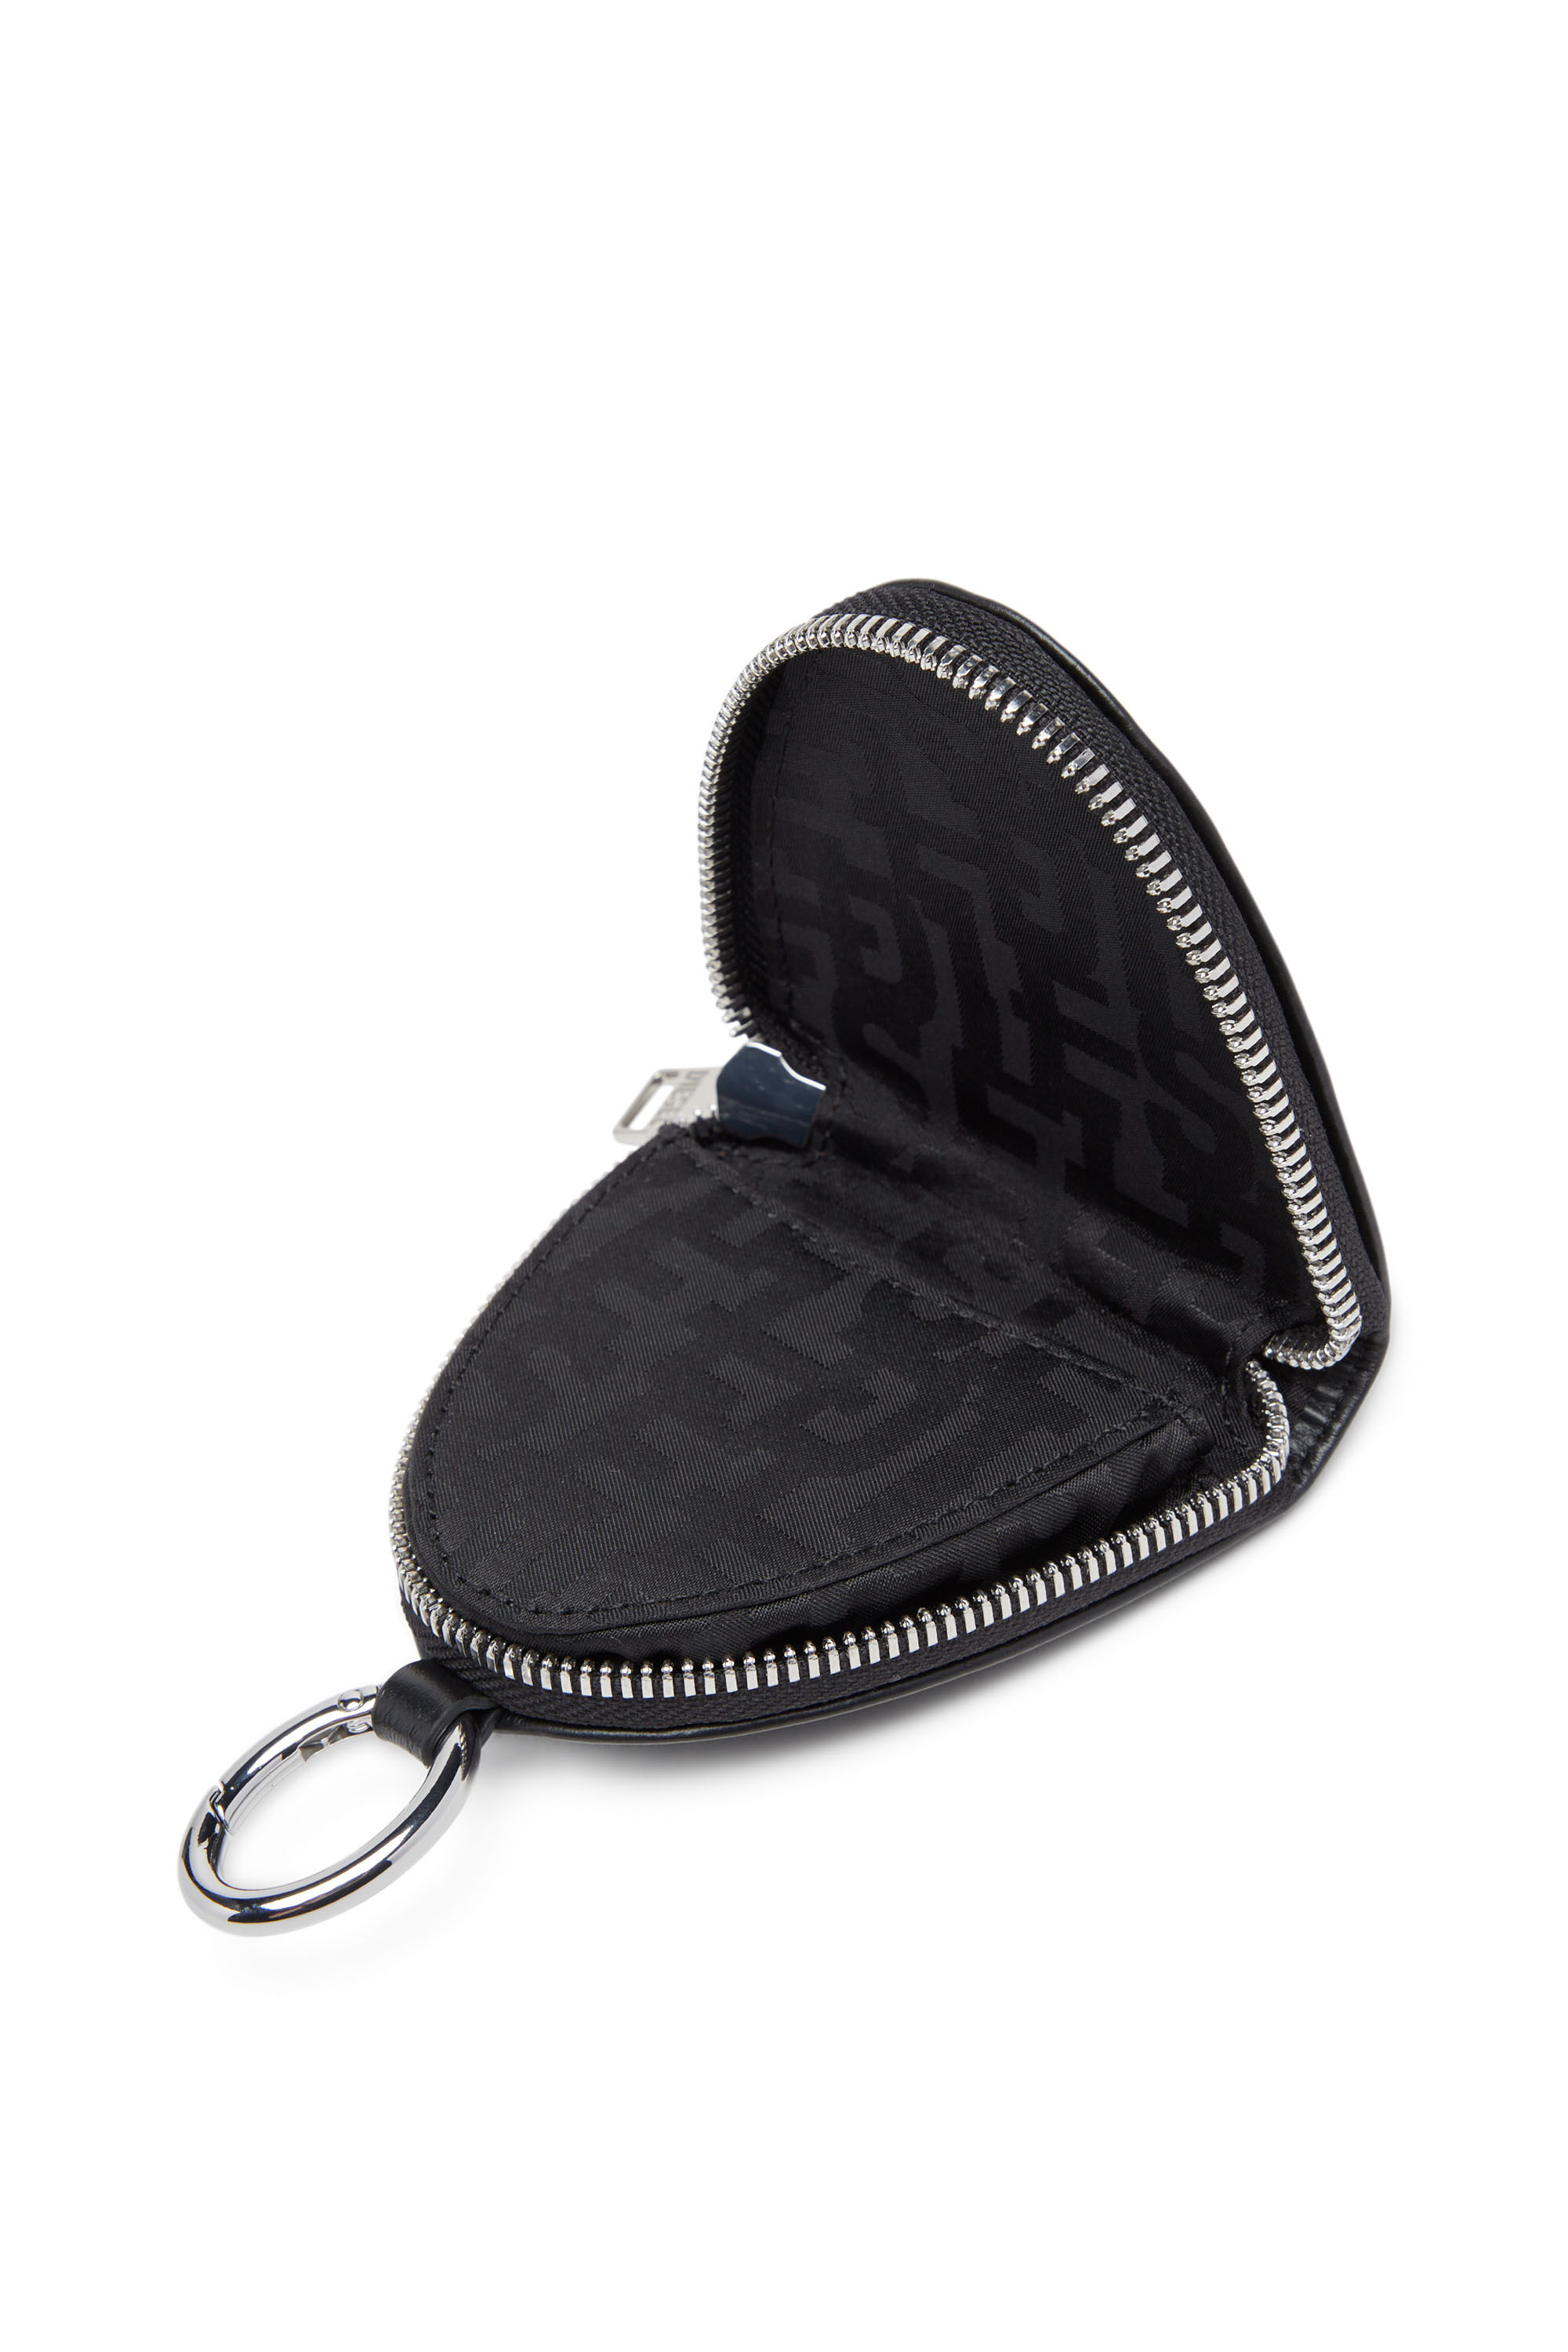 Buy Louis Vuitton Coin Purse Keychain Online In India -  India